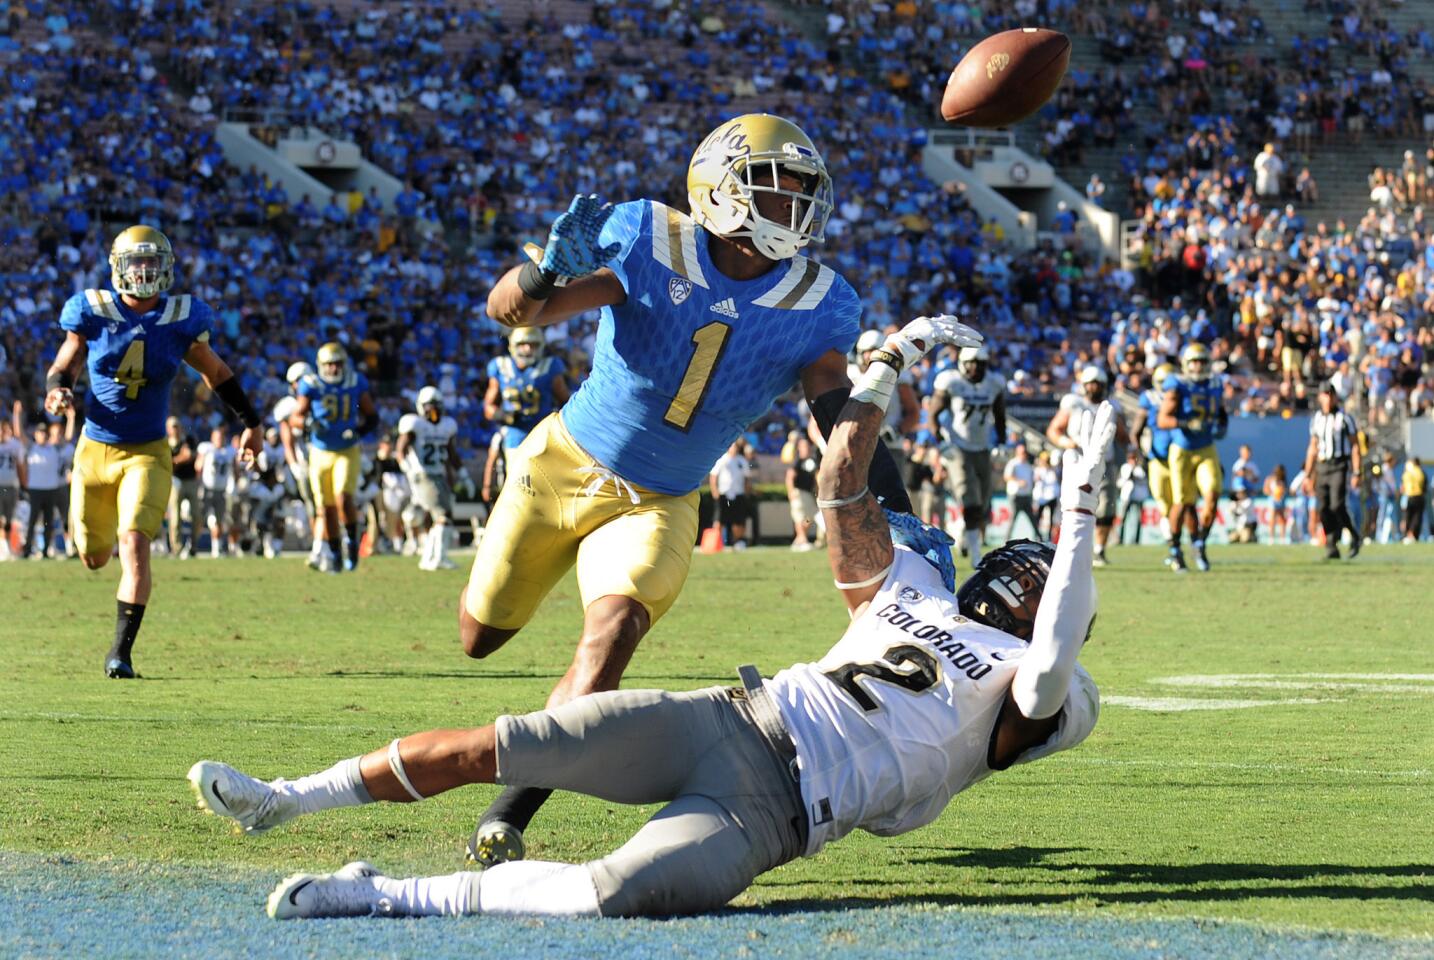 UCLA's weary defense puts finish on Bruins' win over Colorado, 35-31